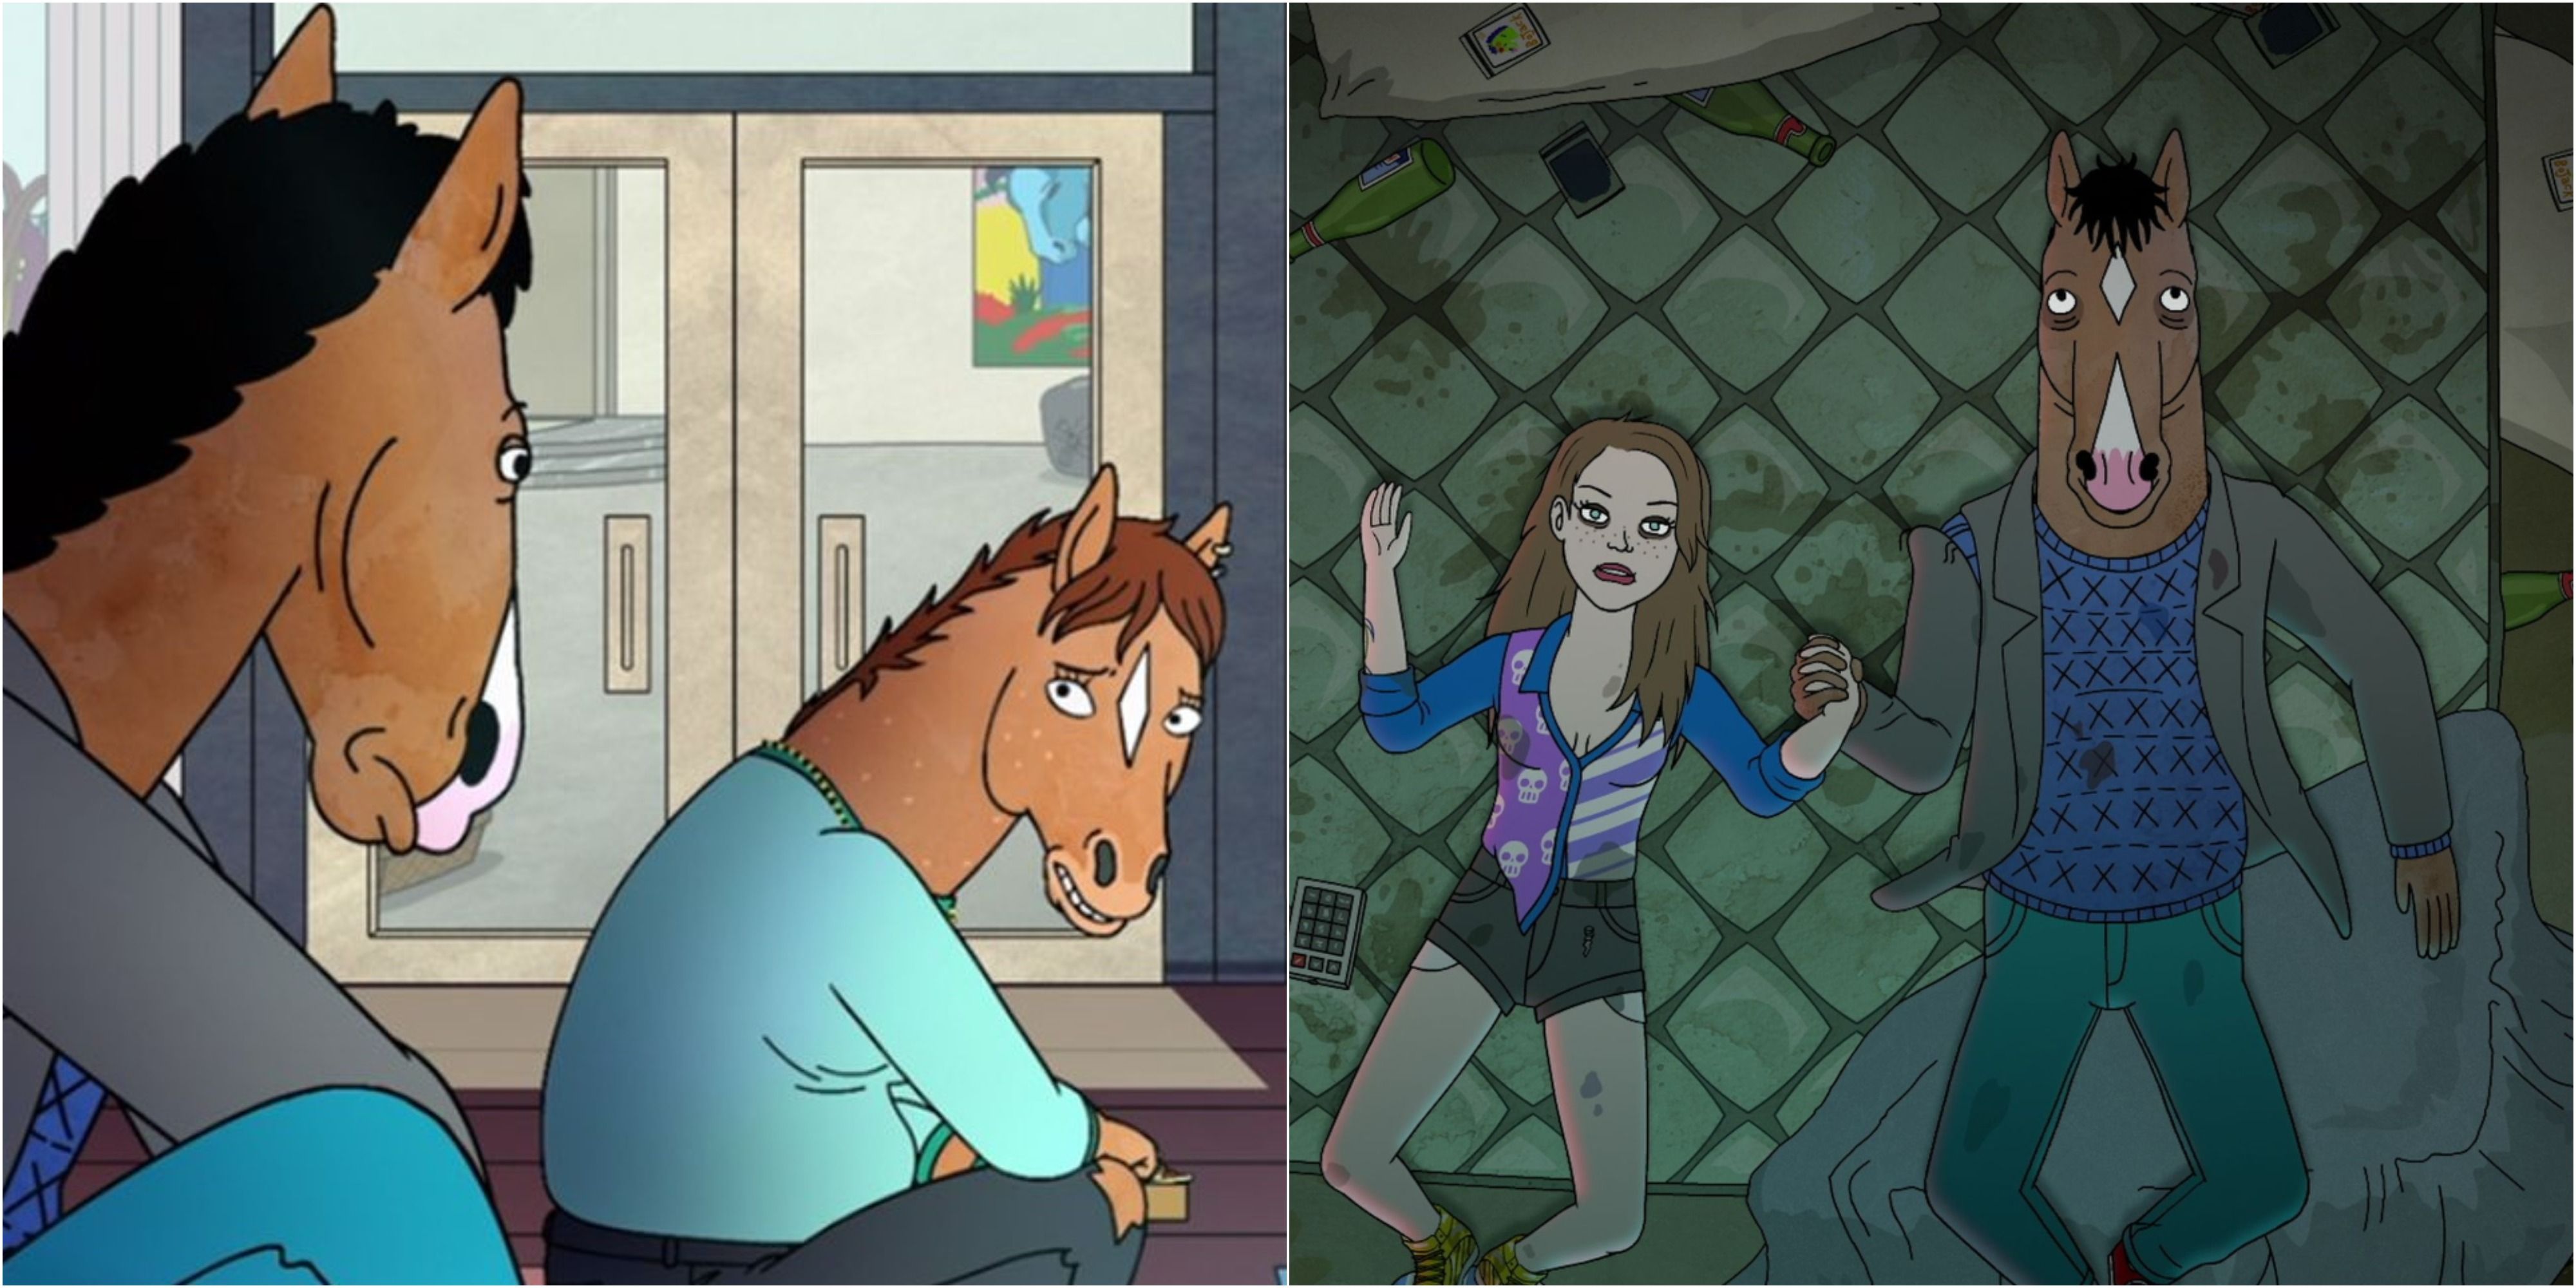 BoJack Horseman Ending Explained: What Happens & What It Really Means